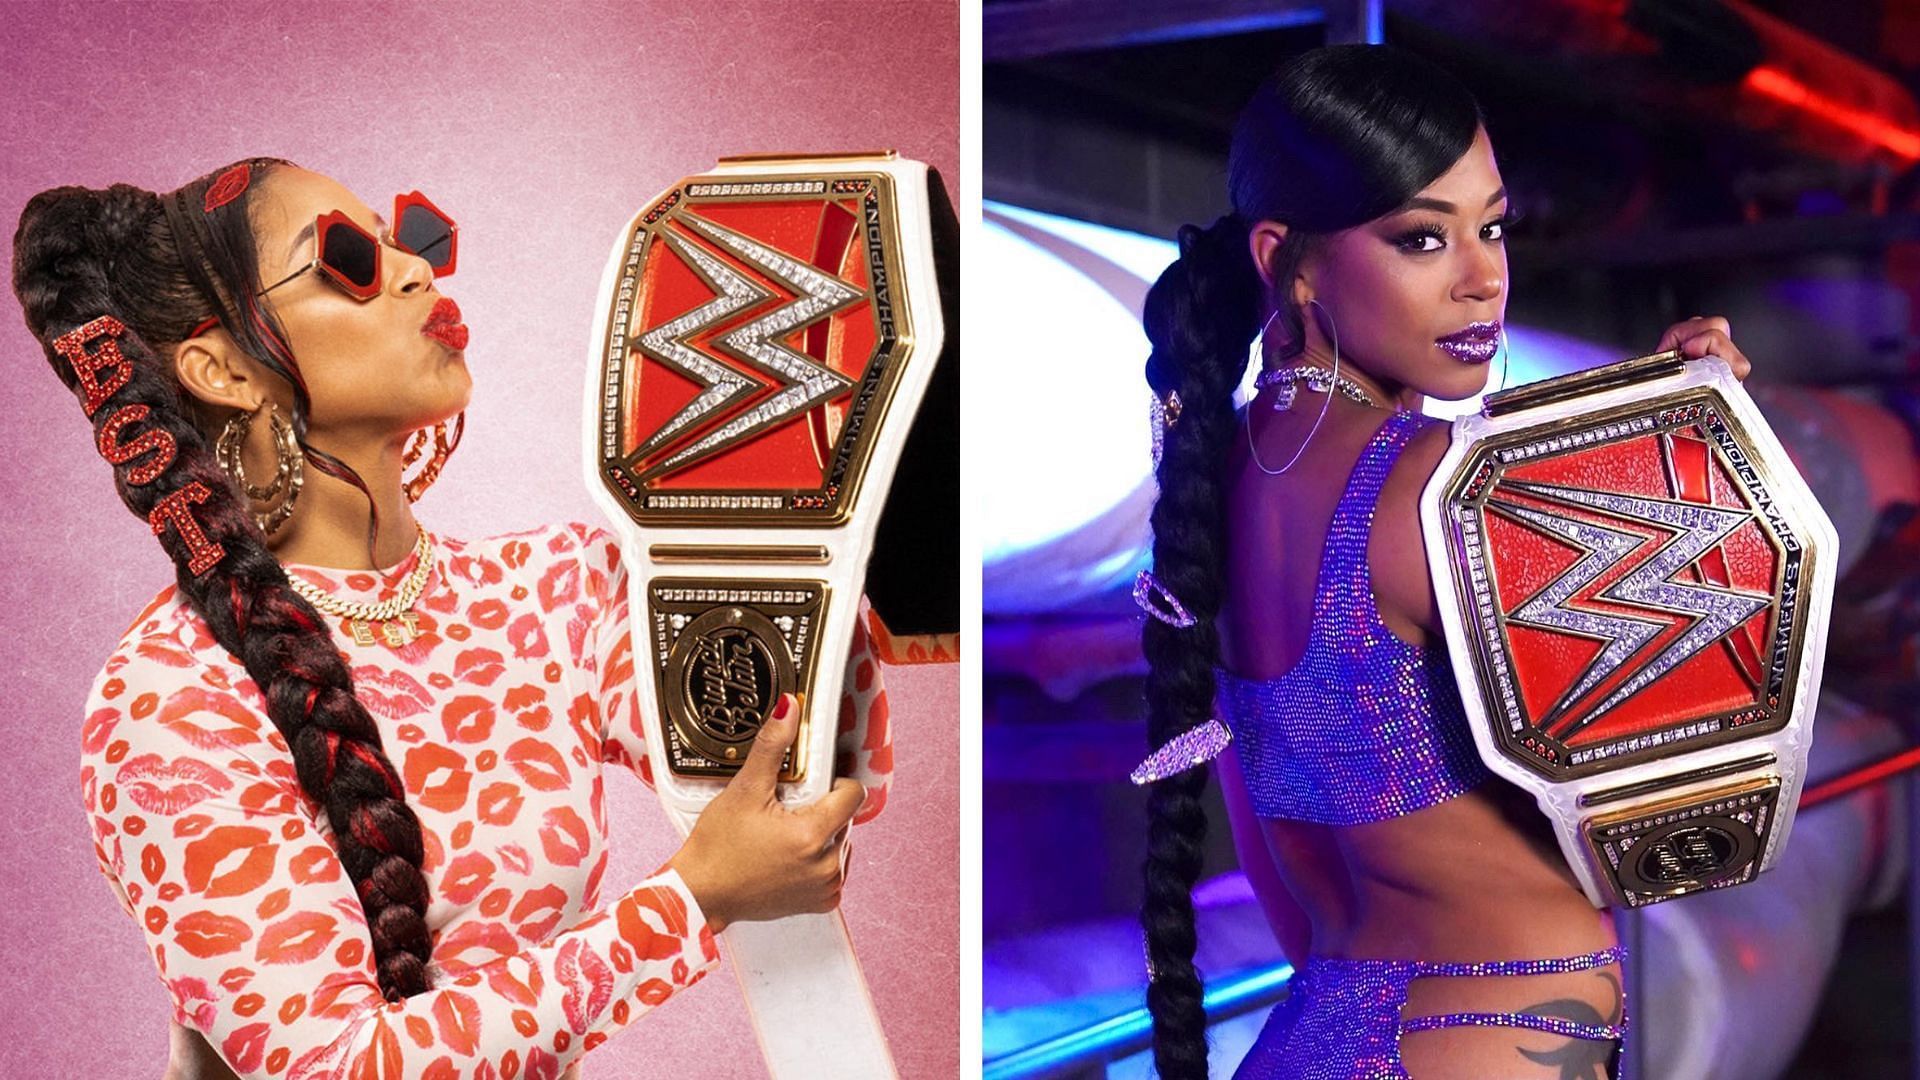 Bianca Belair is the reigning RAW Women